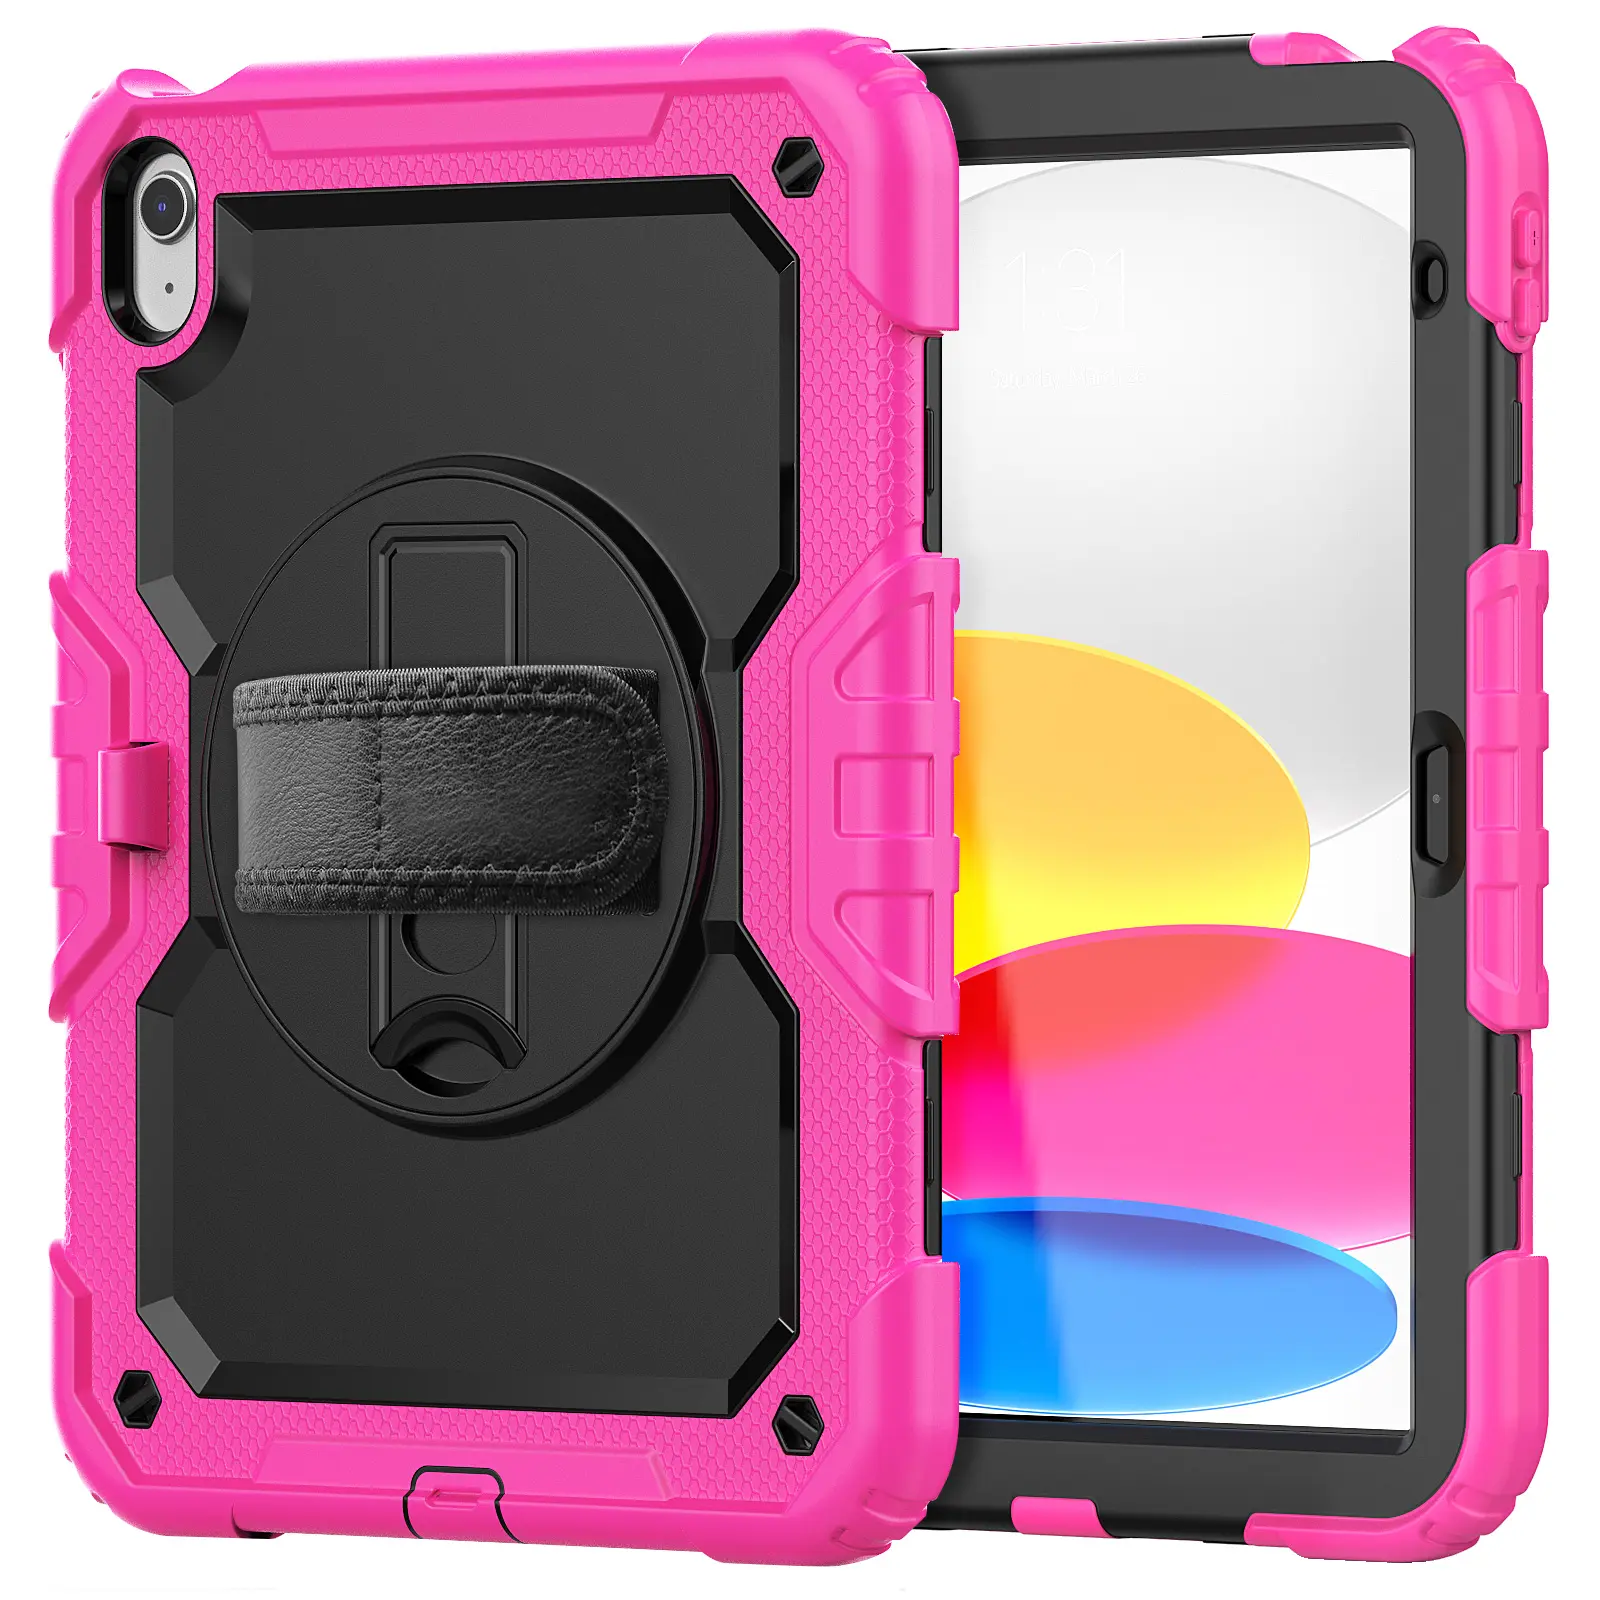 Rugged Full Body Protective Tablet cover For iPad 10.2 heavy duty Case For iPad mini Spilicone shockproof case